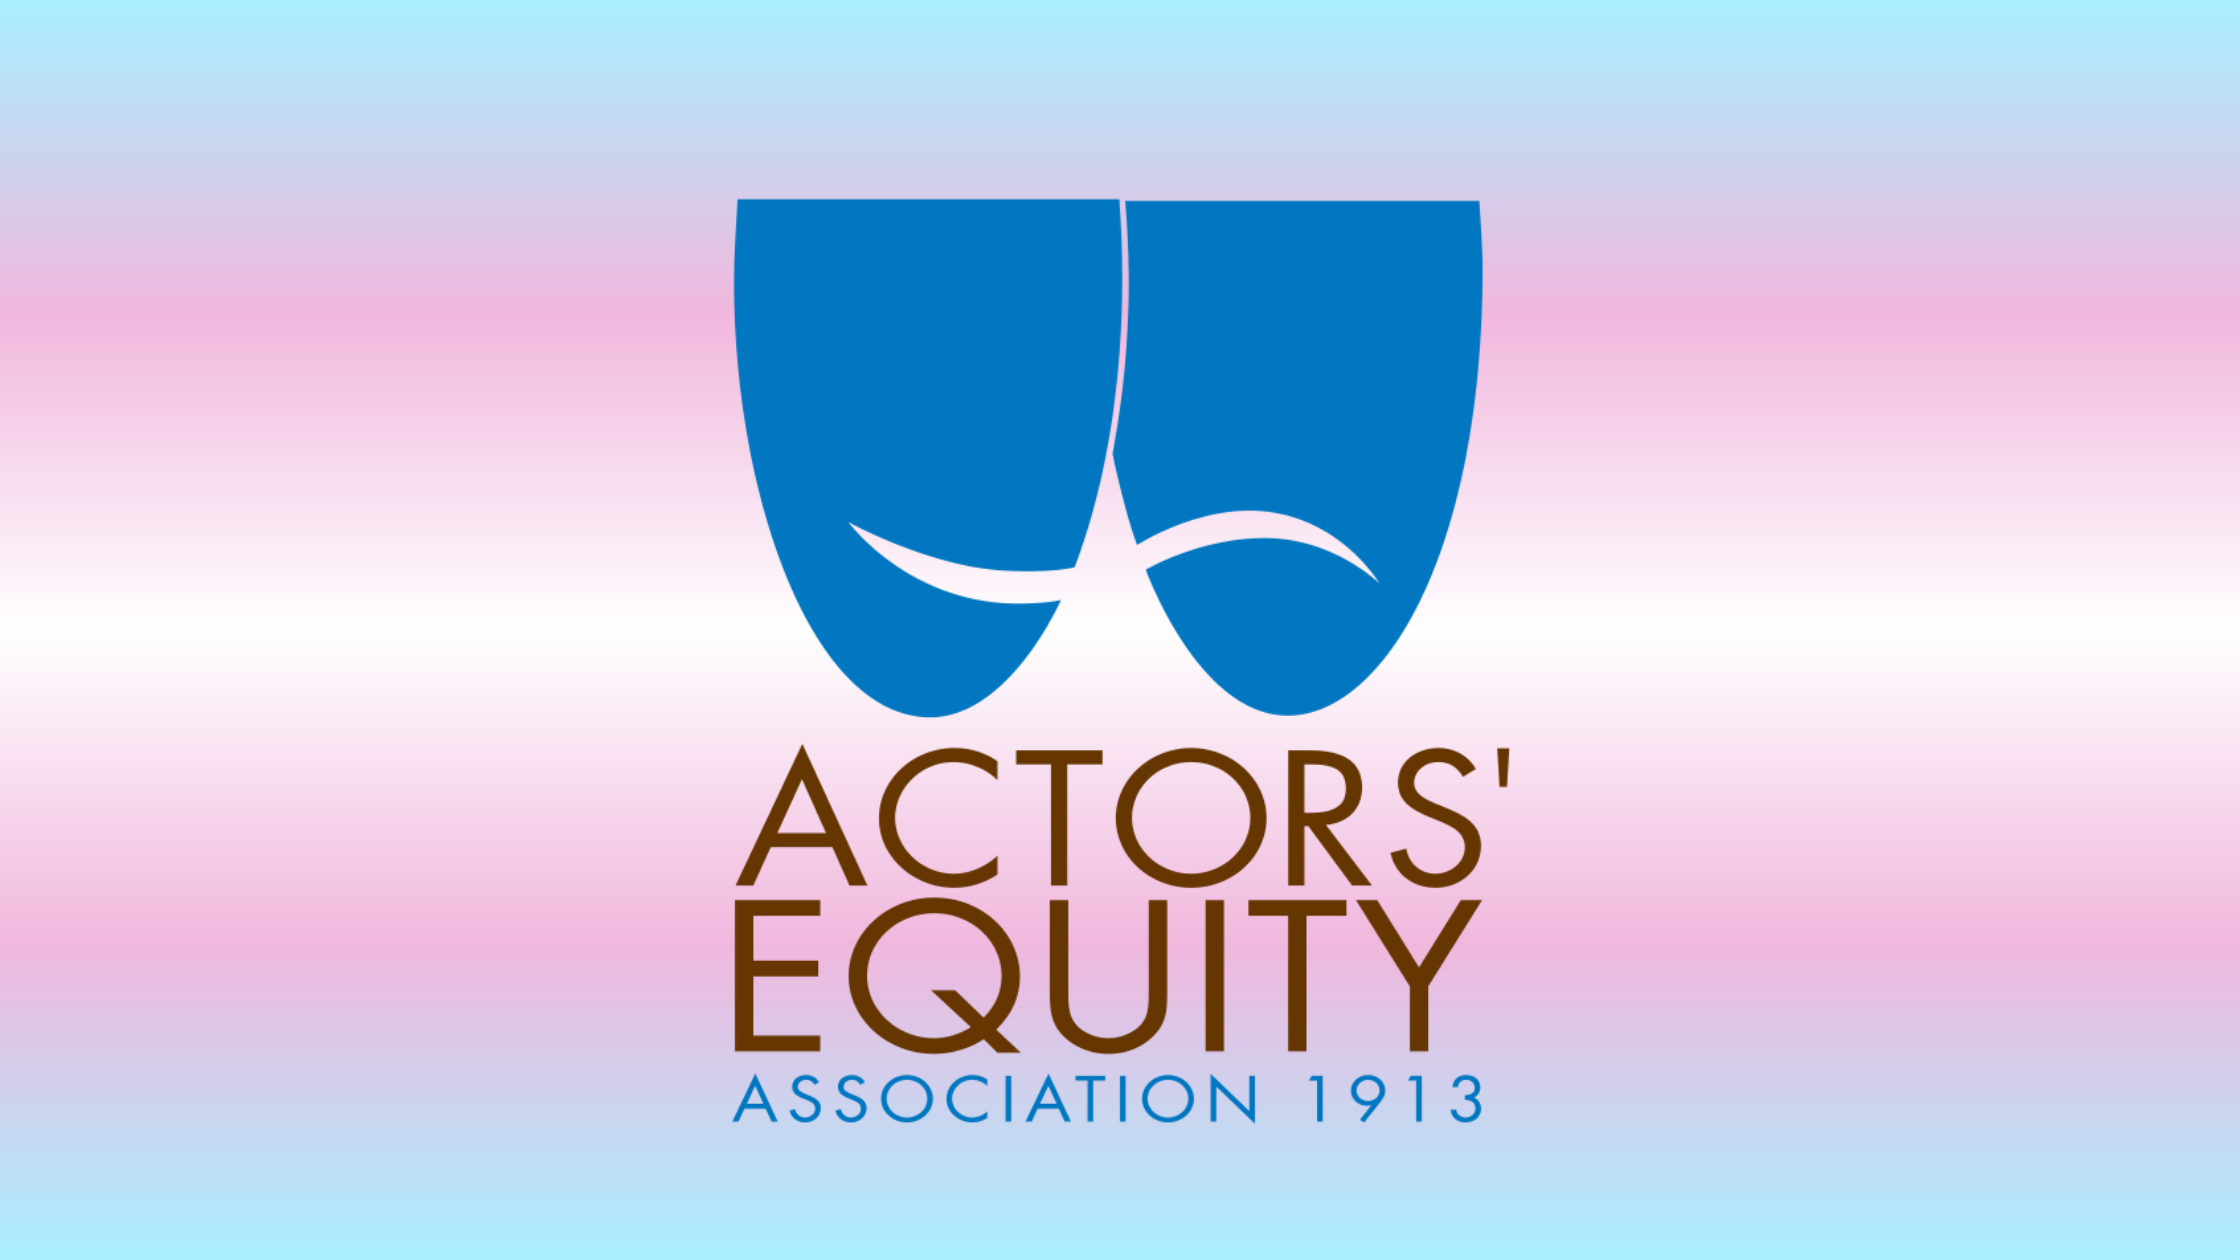 The Actors Equity Association logo superimposed on a background of the trans flag colors